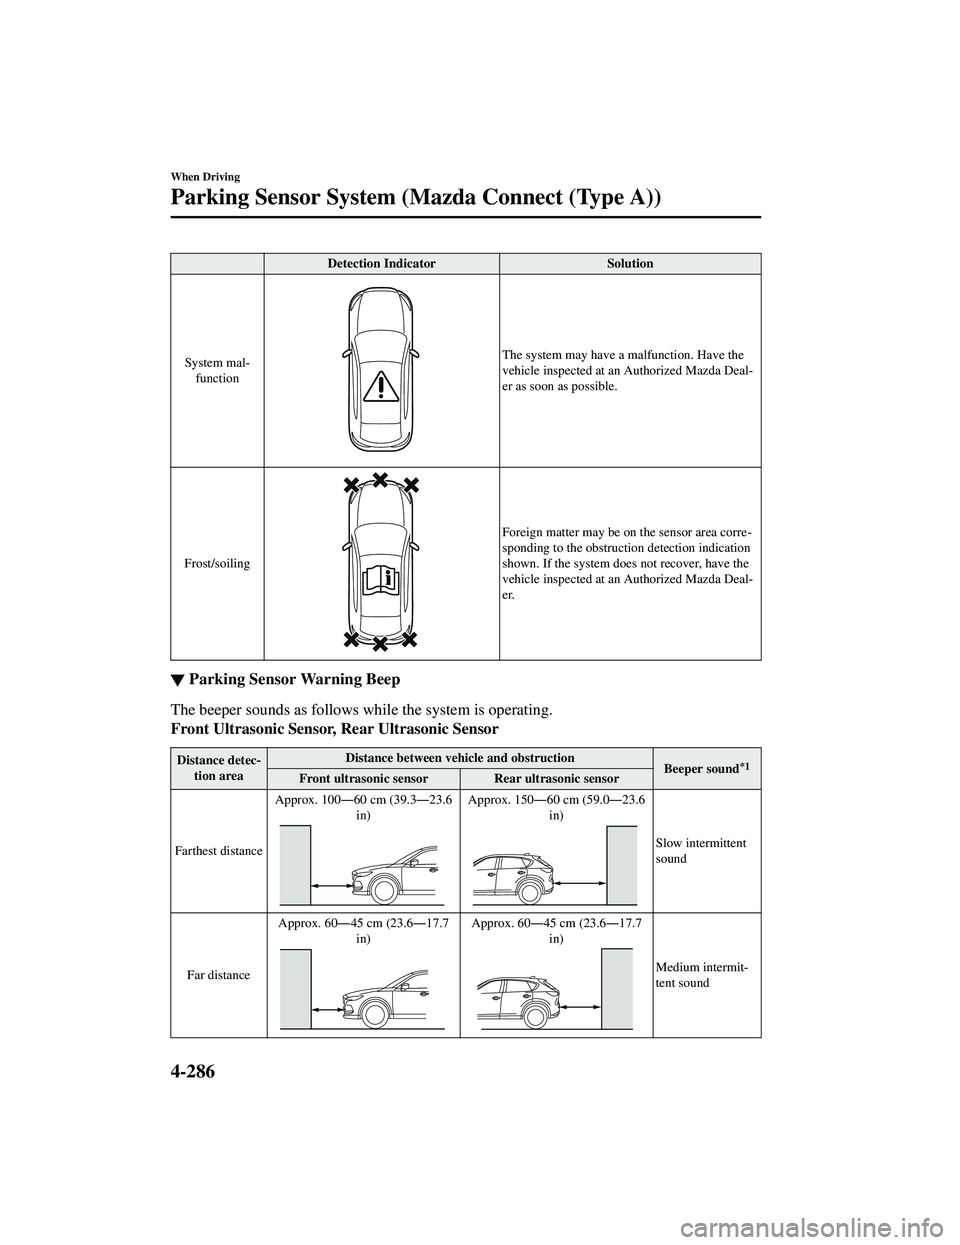 MAZDA MODEL CX-5 2021  Owners Manual Detection IndicatorSolution
System mal ‐
function
The system may have a malfunction. Have the
vehicle inspected at an  Authorized Mazda Deal ‐
er as soon as possible.
Frost/soiling
Foreign matter 